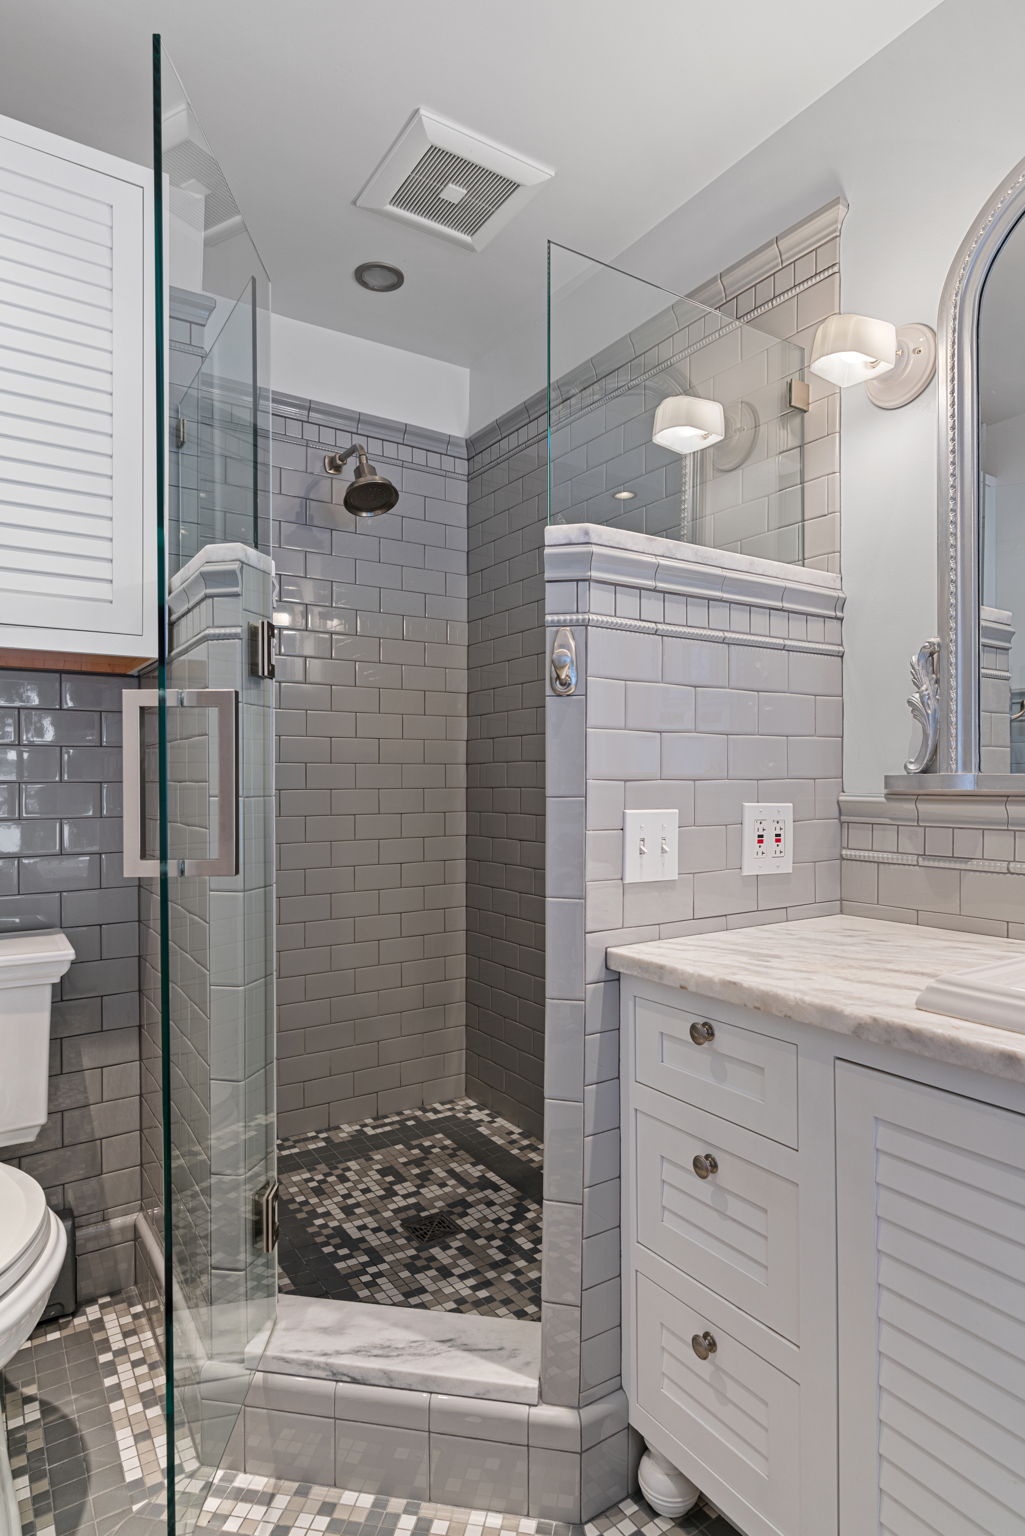 Renovated bathroom featuring a luxurious walk-in shower.